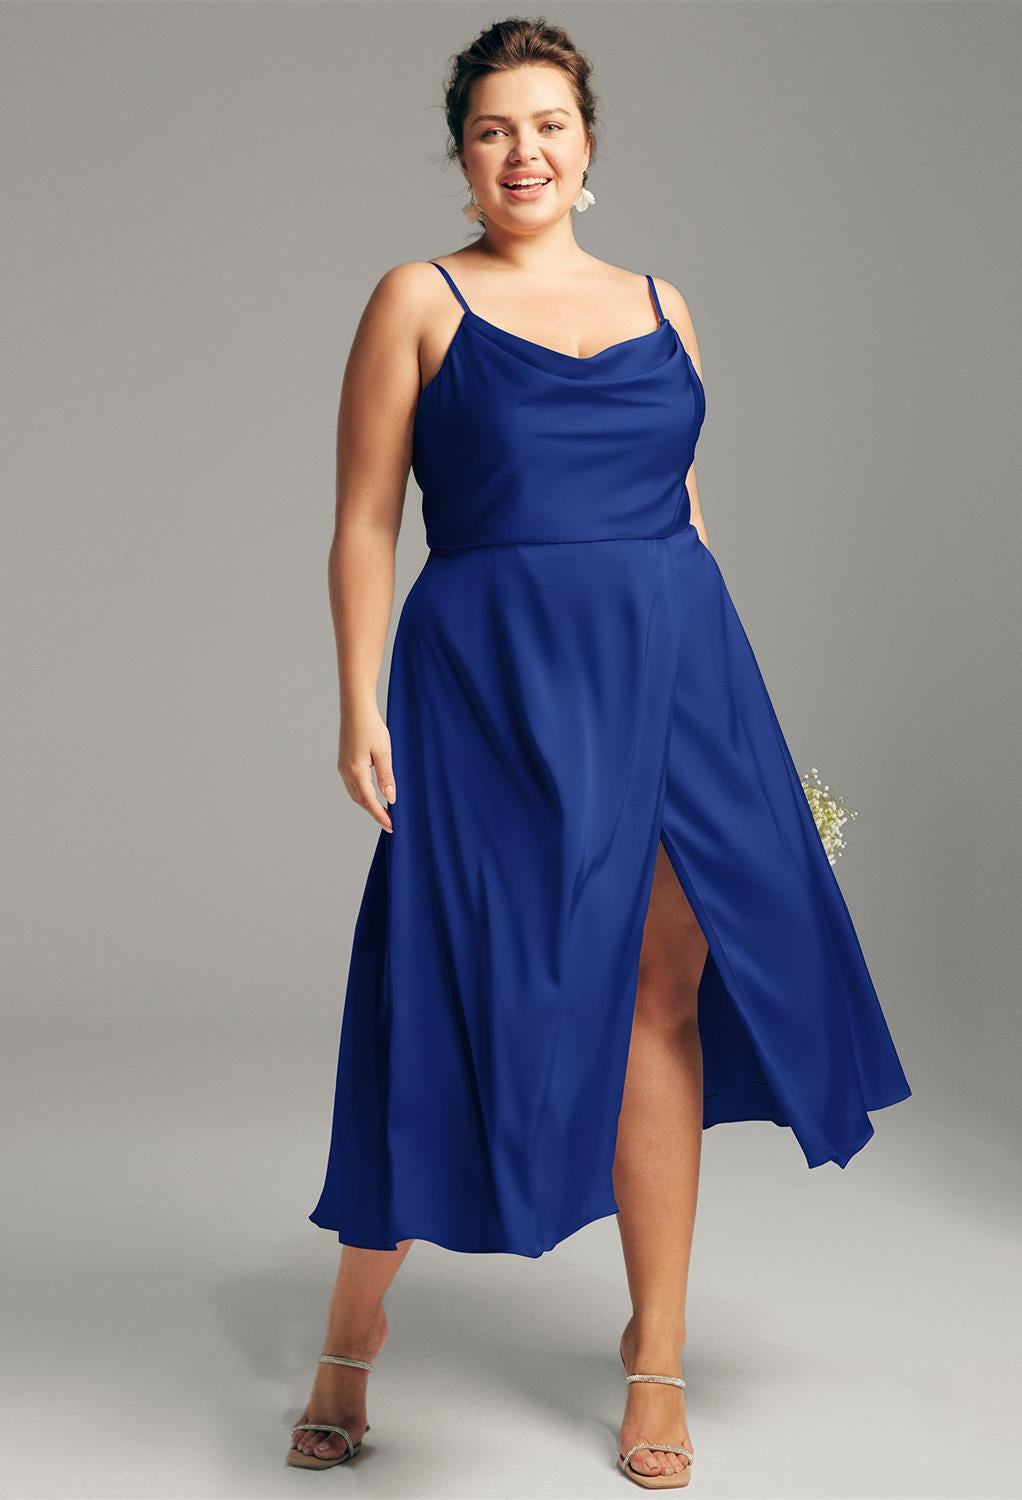 Renee - Satin Charmeuse Bridesmaid Dress - Off the Rack by Bergamot Bridal with a slit available at bridal shops in London.